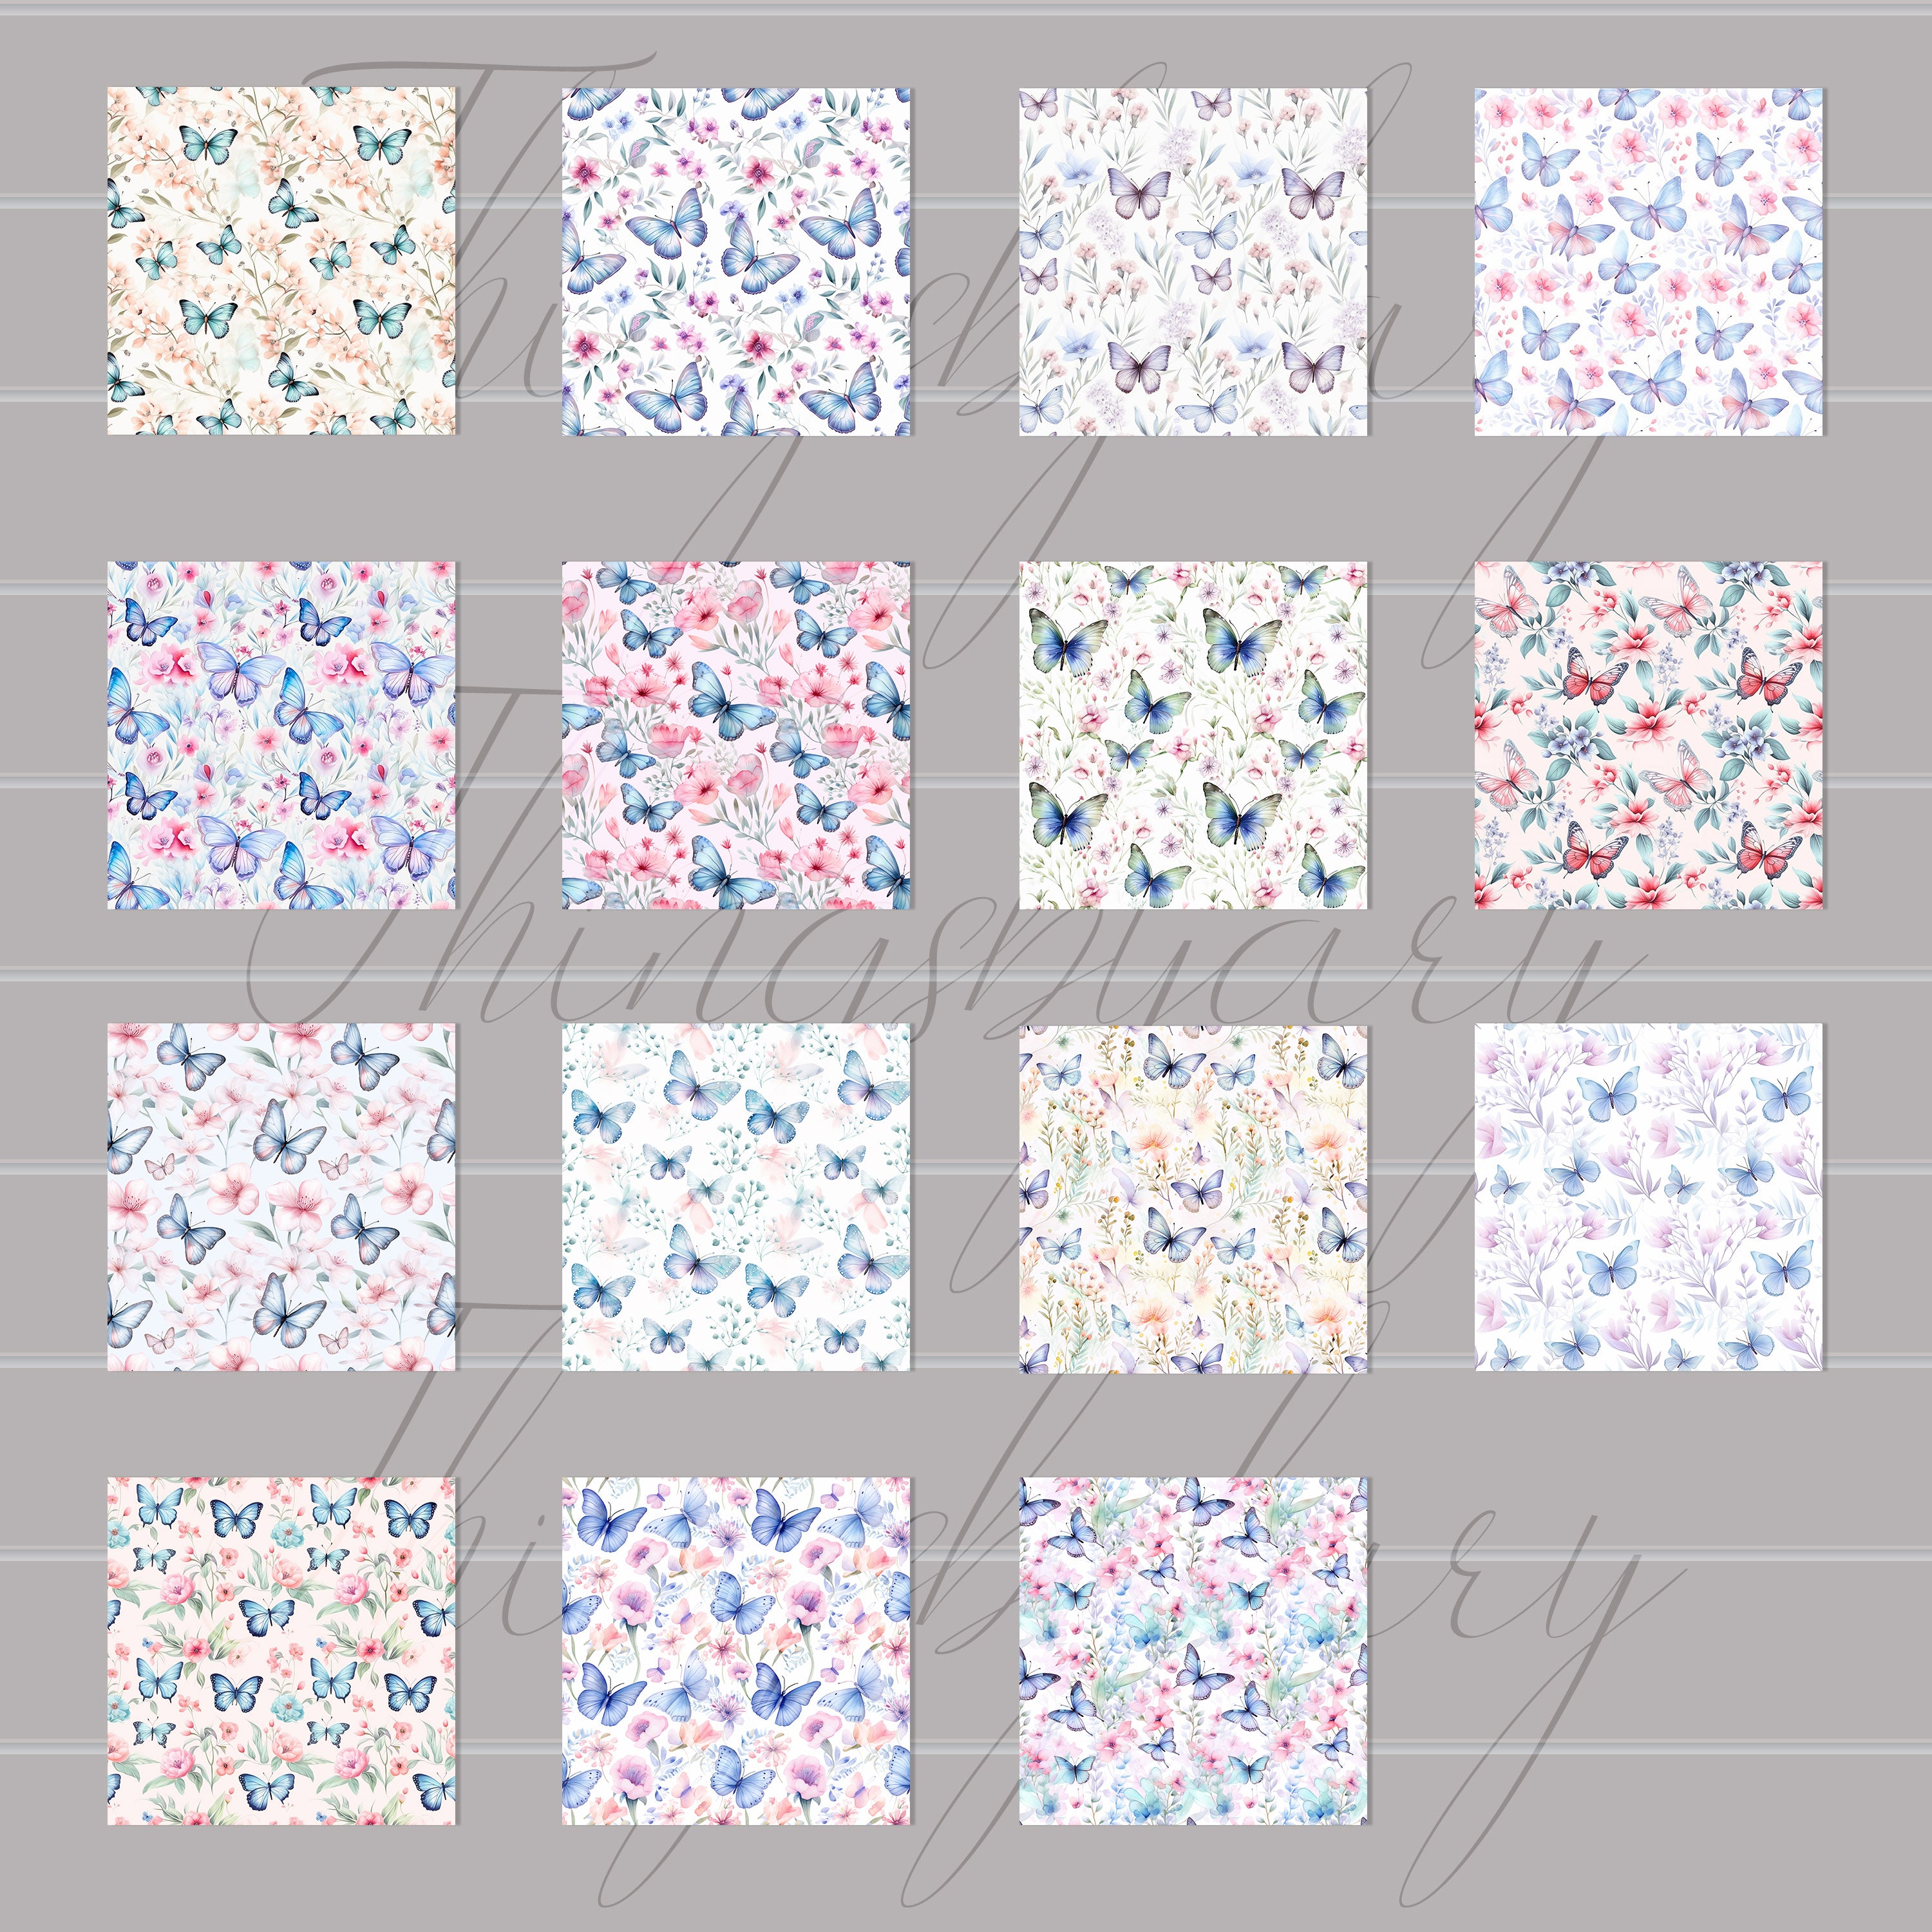 30 Seamless Watercolor Butterflies and Flowers Vol 2 Digital Papers